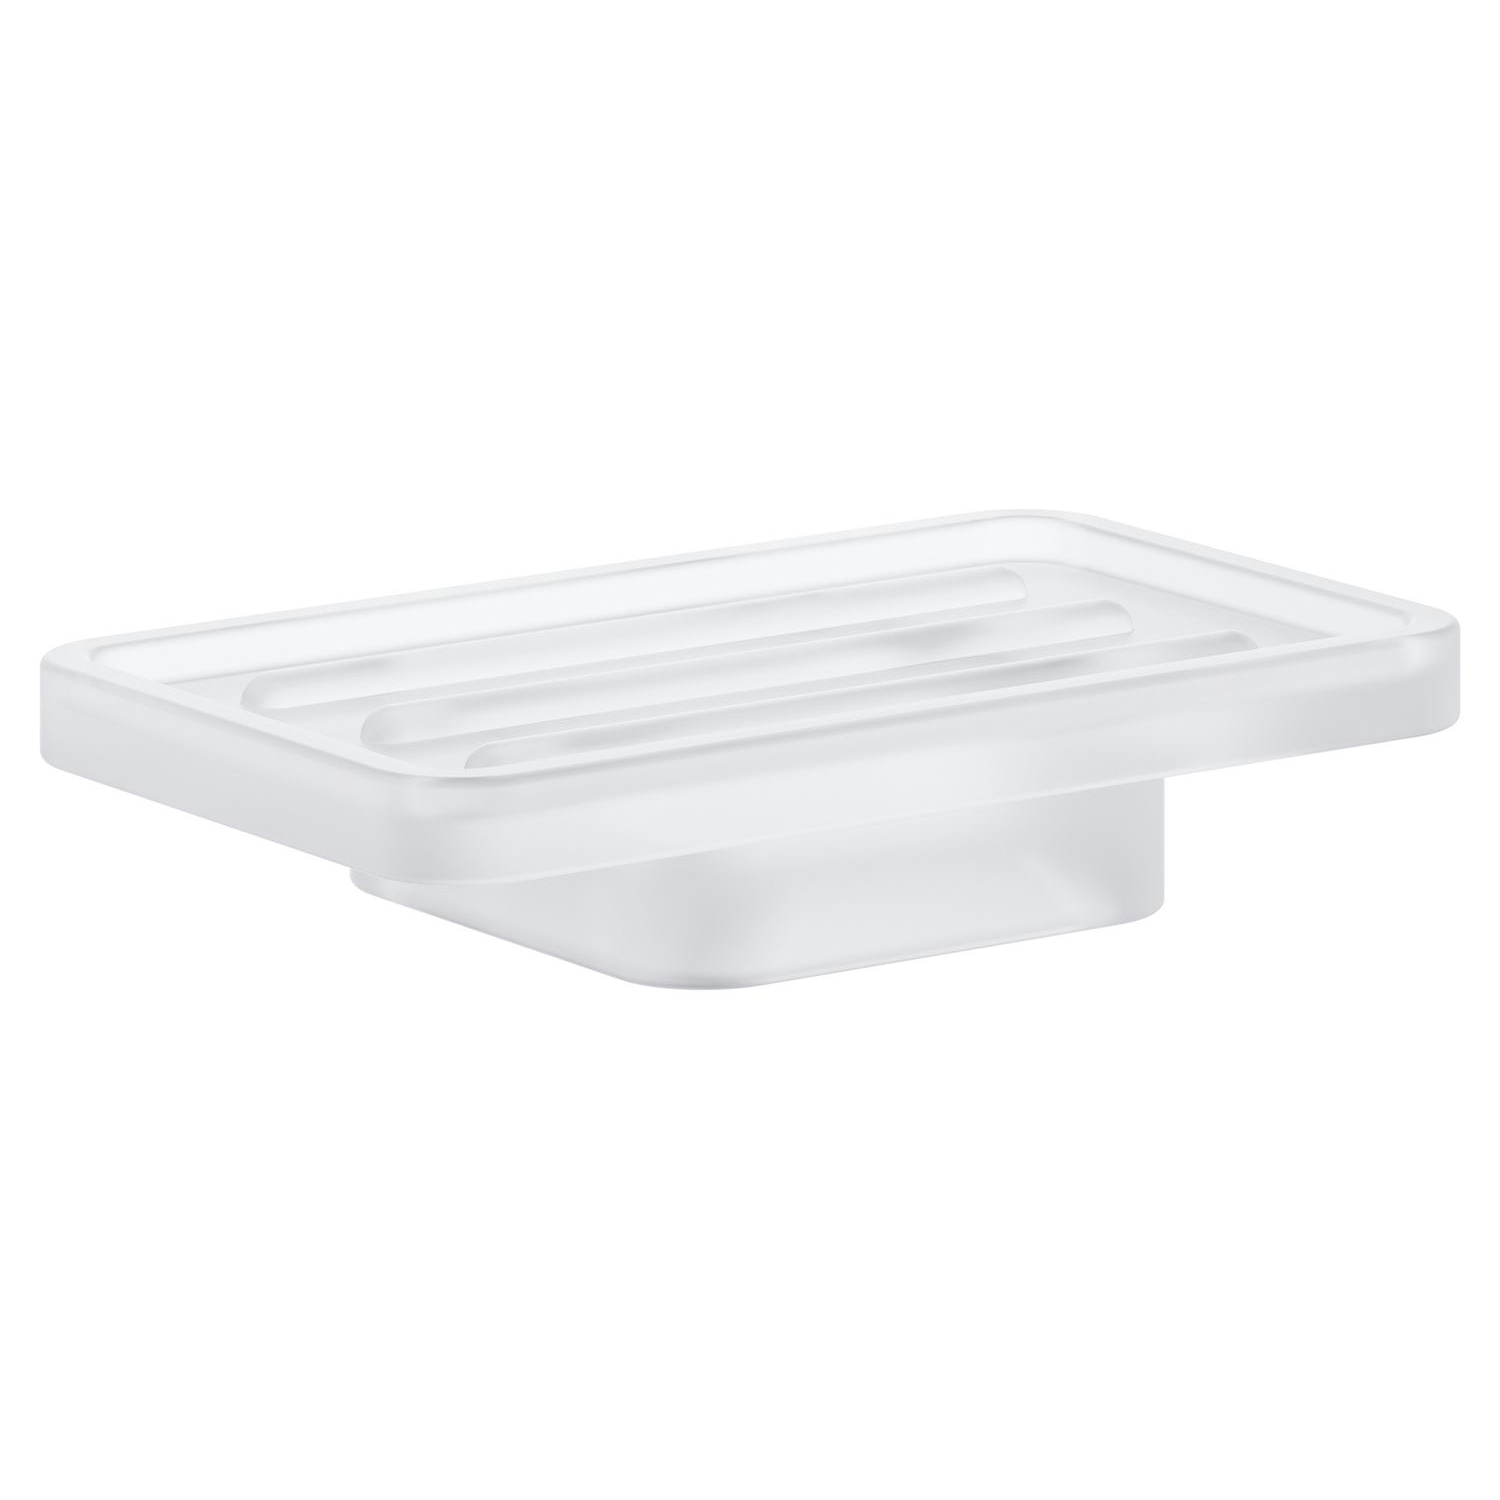 Selection Cube Glass Soap Dish Only in DaVinci Satin White